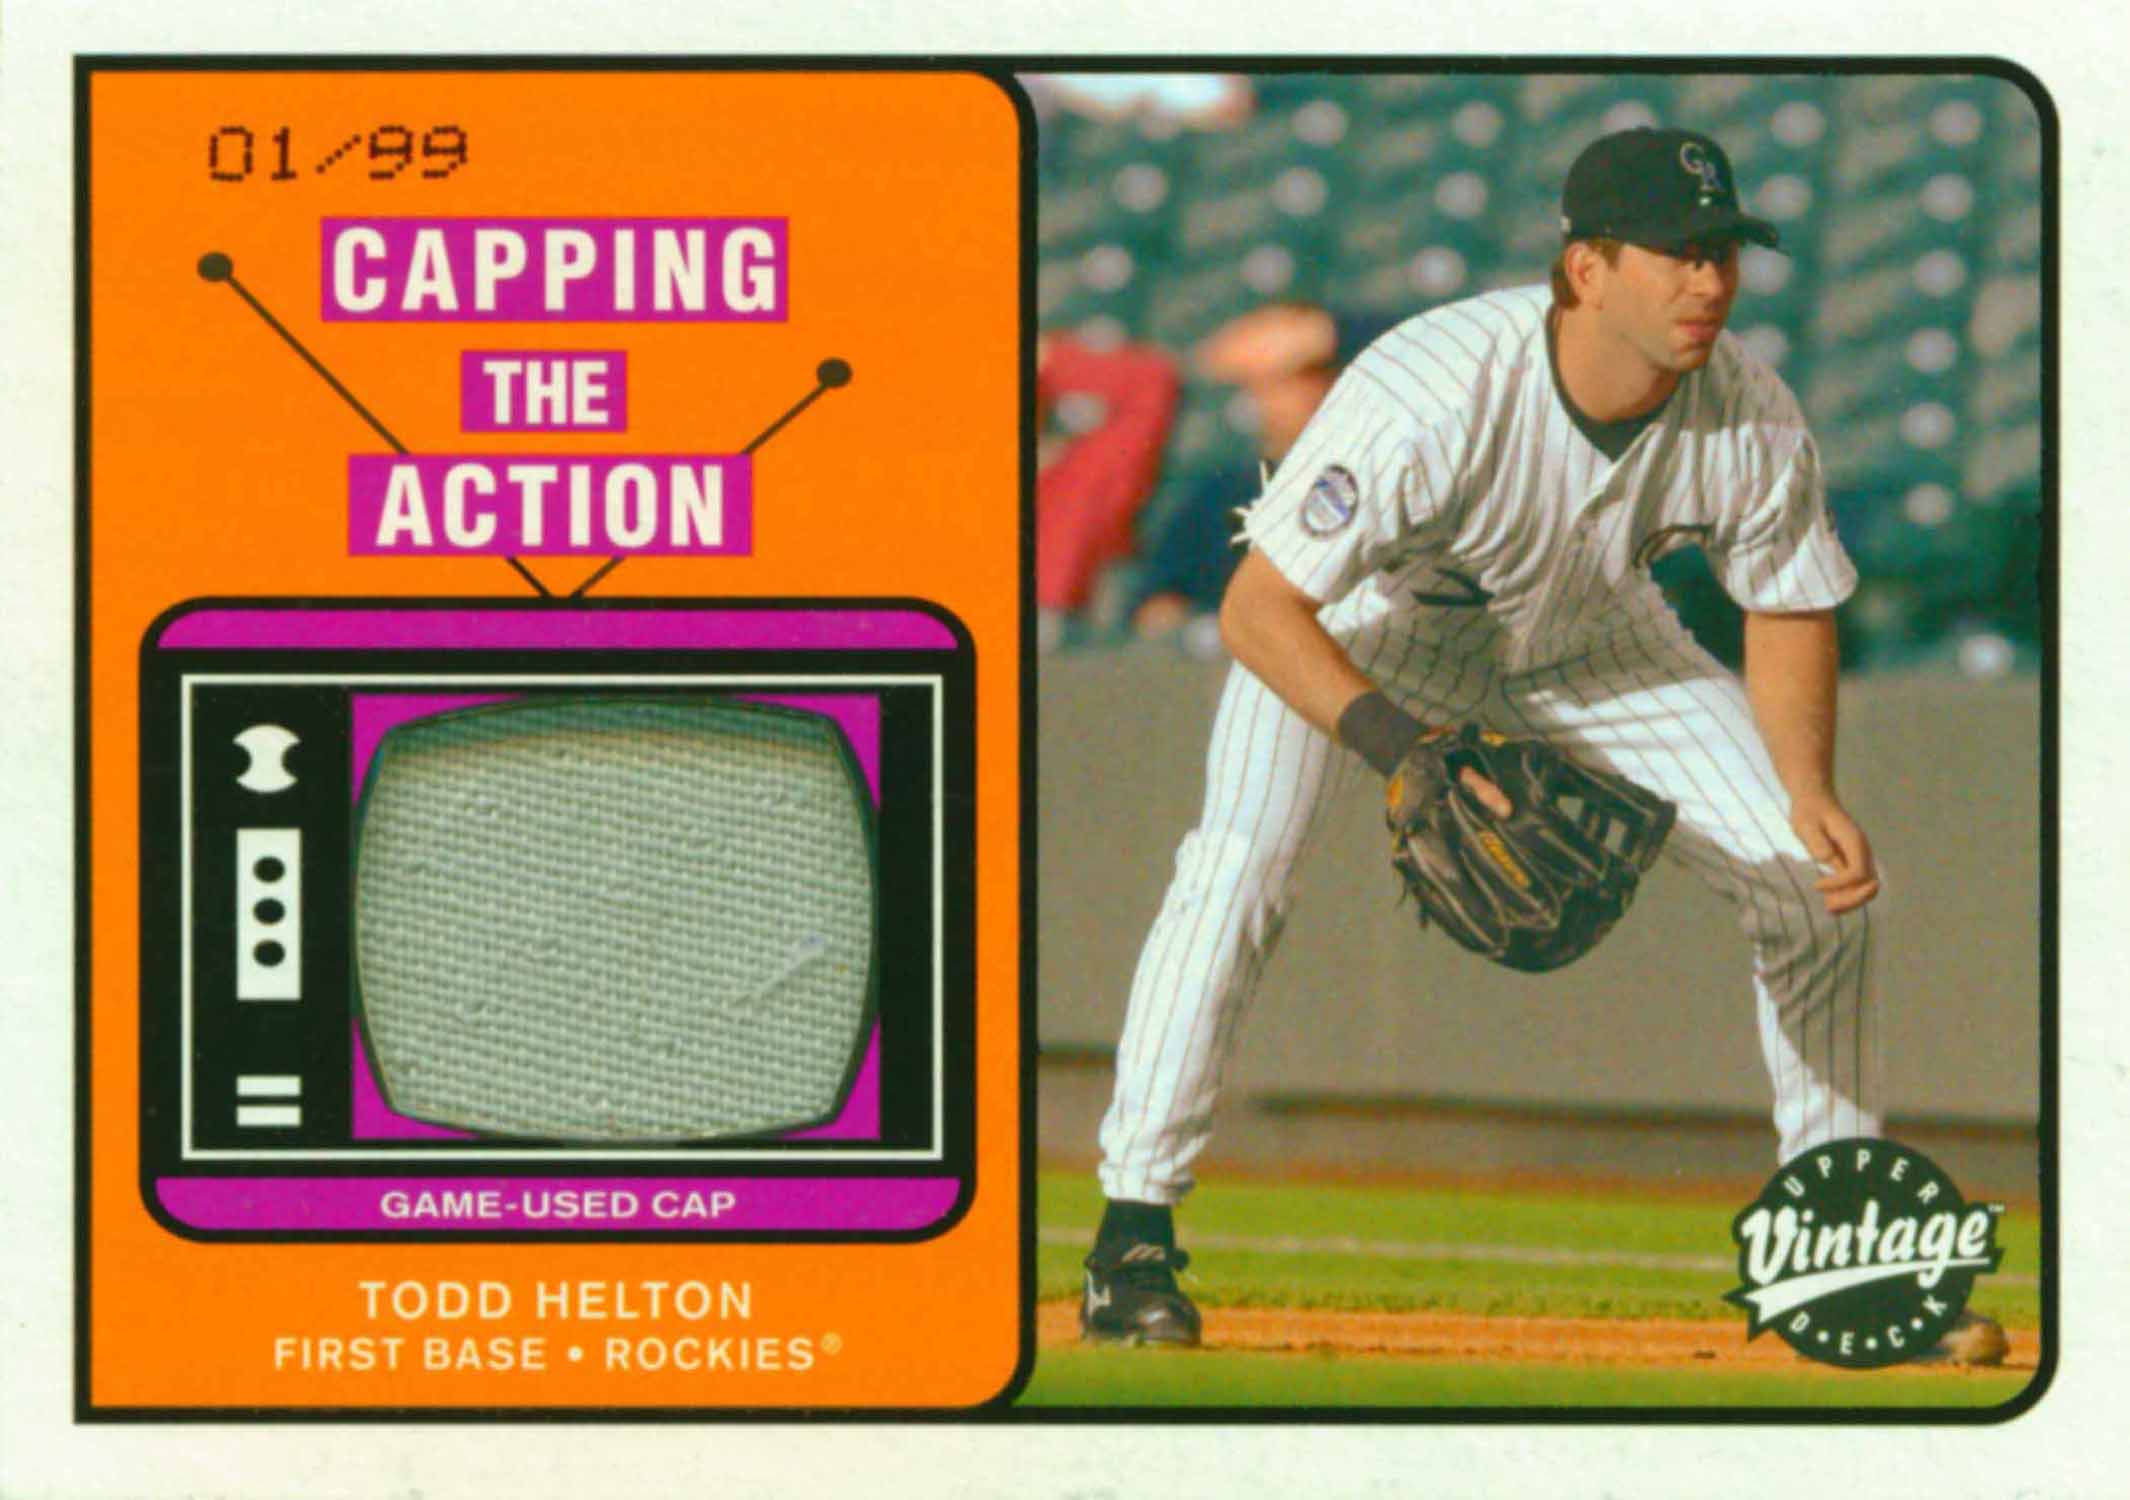 2003 Upper Deck Vintage Capping the Action